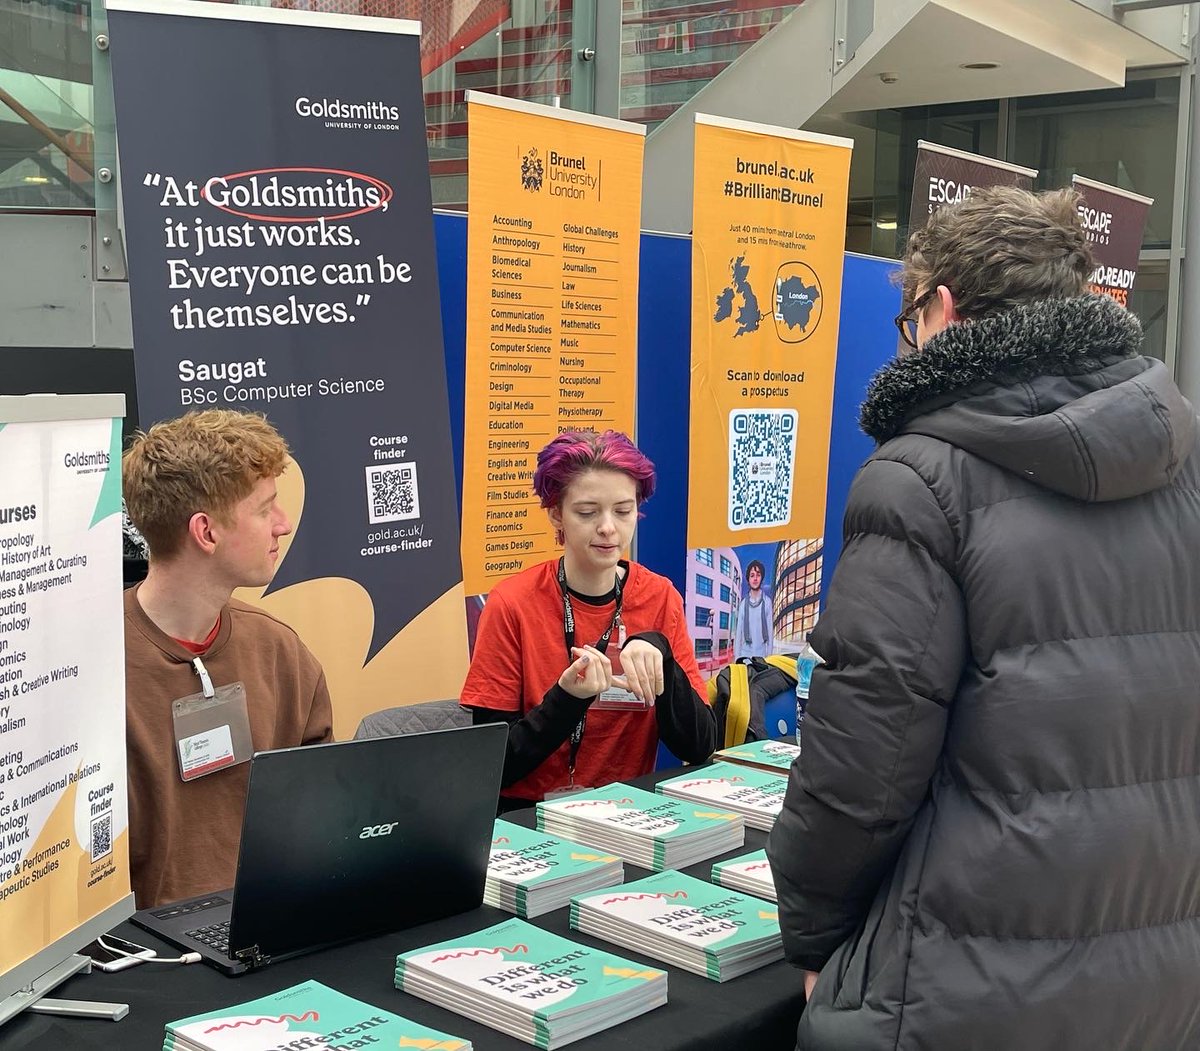 A great way to plan your future. 🎓🌟 Our students had the unique chance to chat directly with university reps, admission officers, and professors from across the country! 🤩🎉 Did you find the HE Fair enlightening? #StartHereGoFar #HigherEdFair